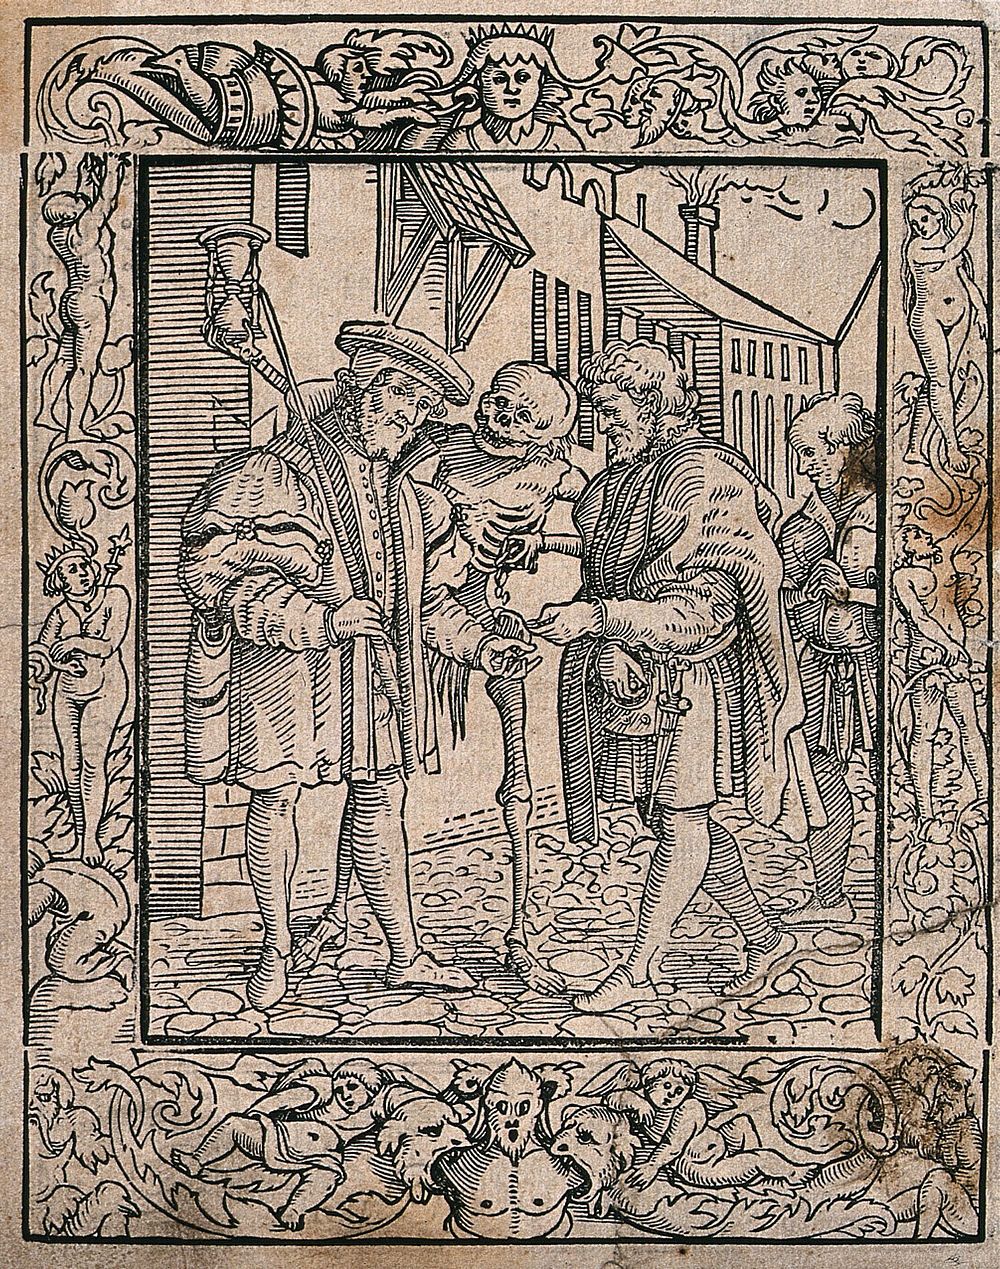 The dance of death: the advocate. Woodcut after Hans Holbein the younger.